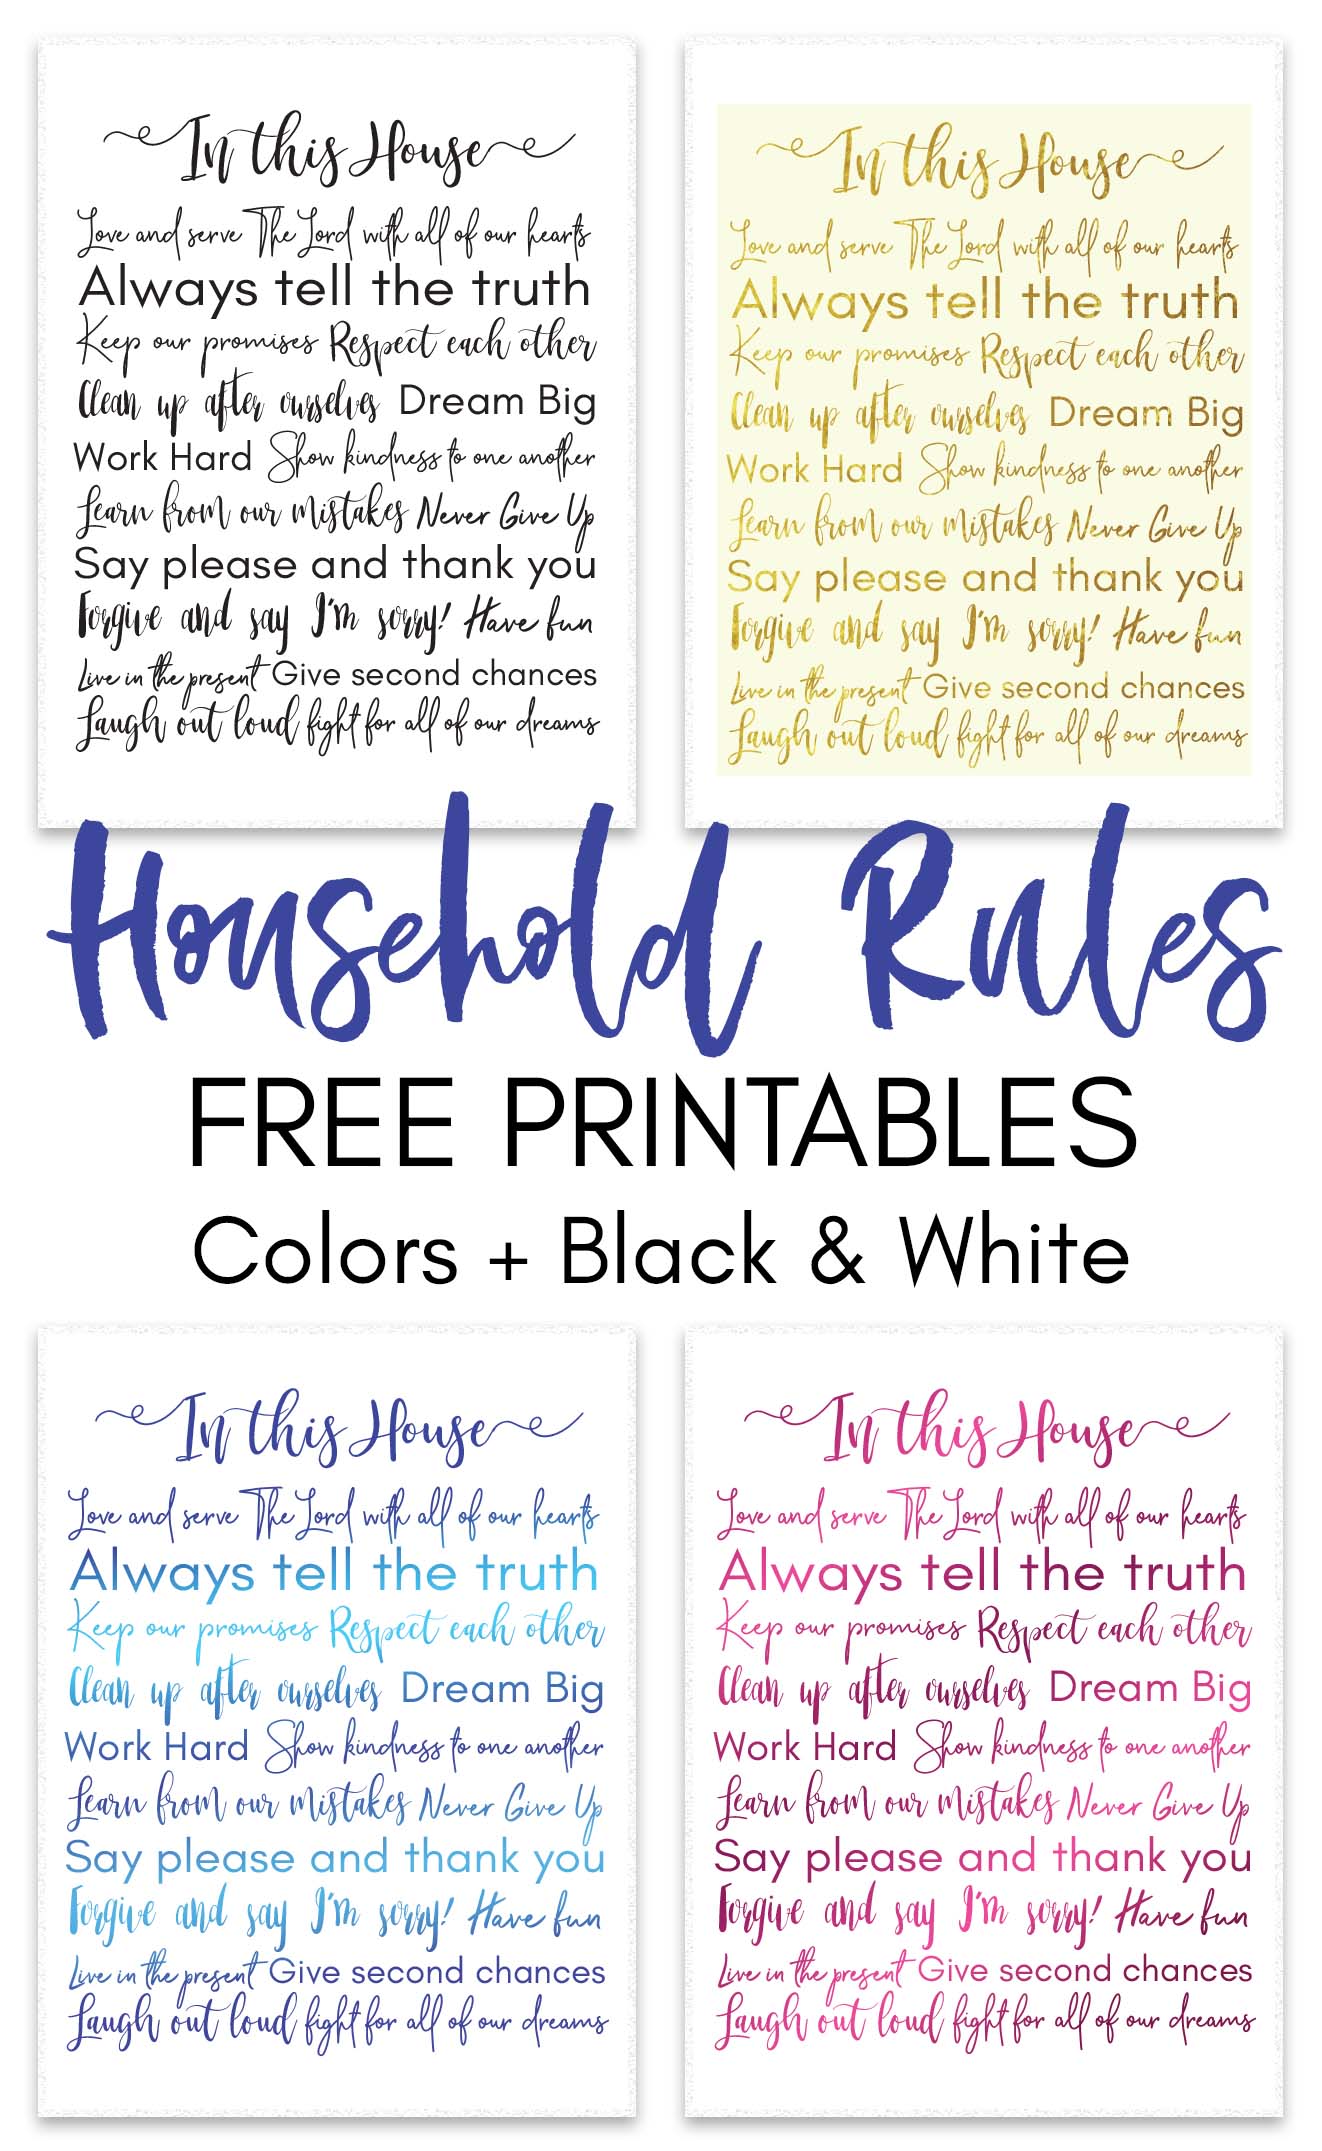 Household Rules Free Printable